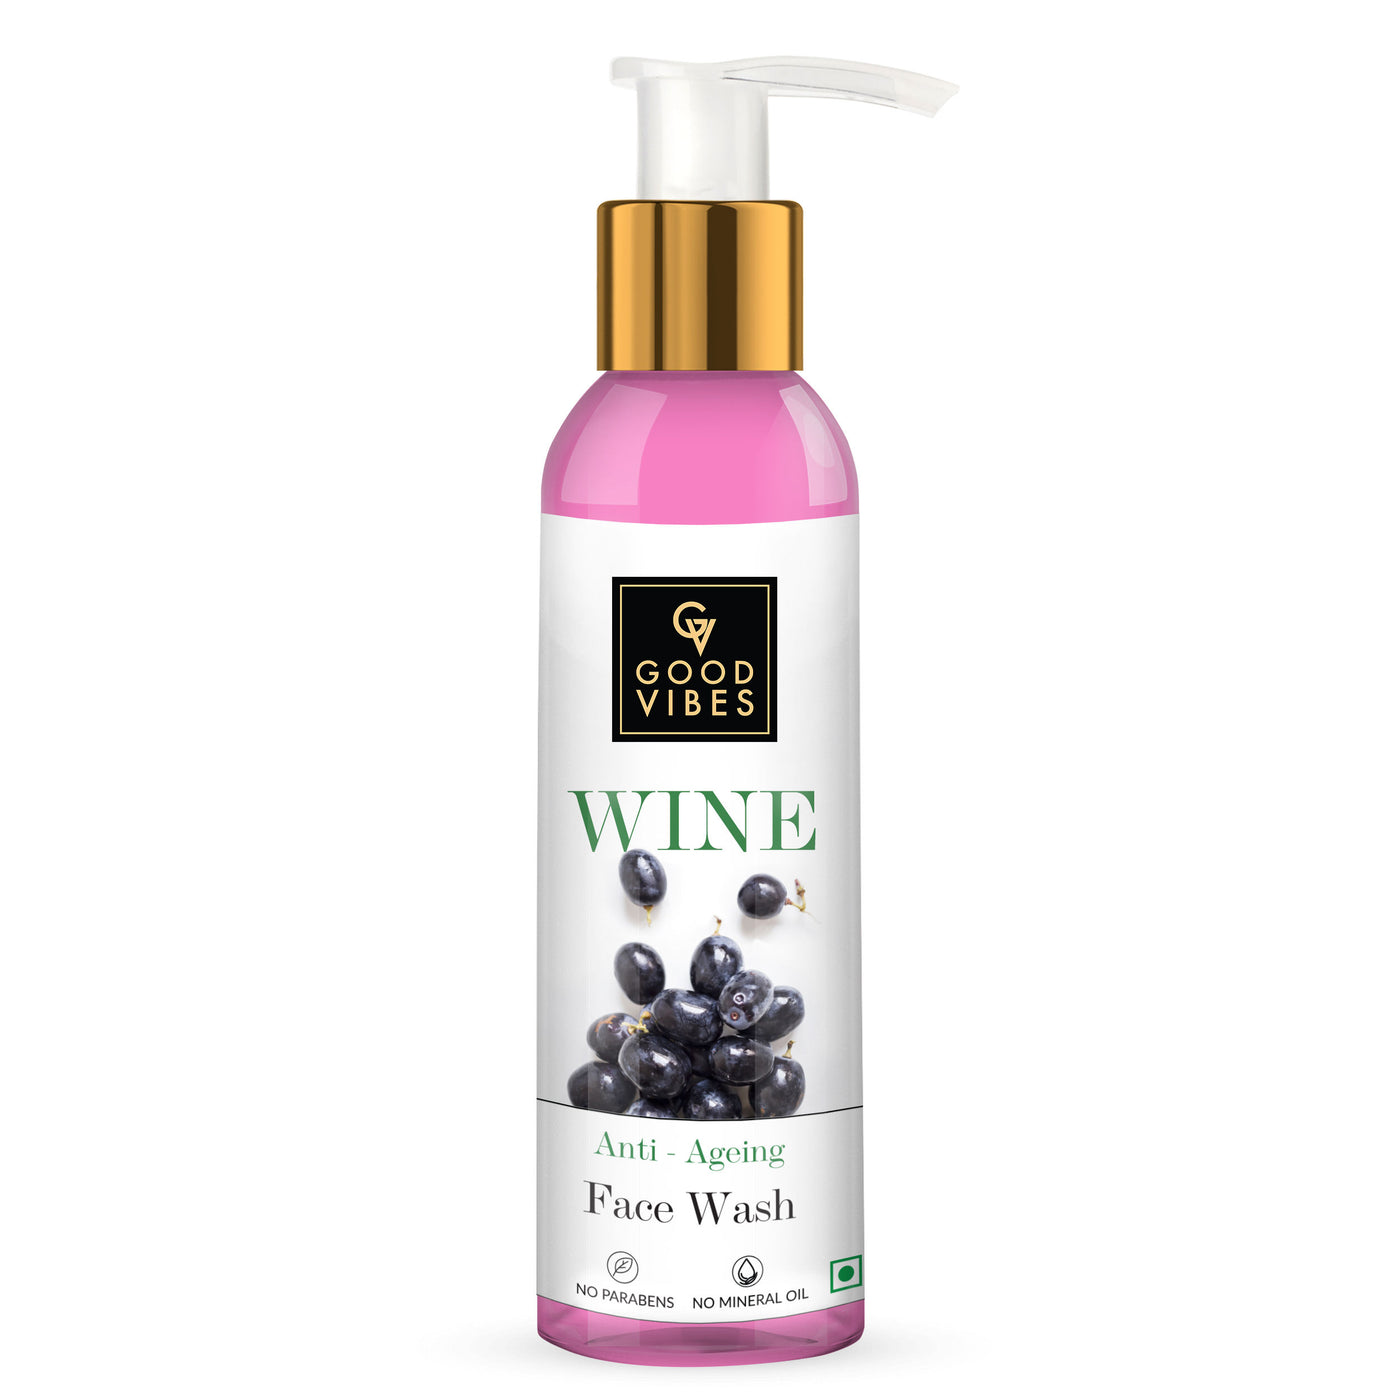 good-vibes-anti-ageing-face-wash-wine-120-ml-97-72-8